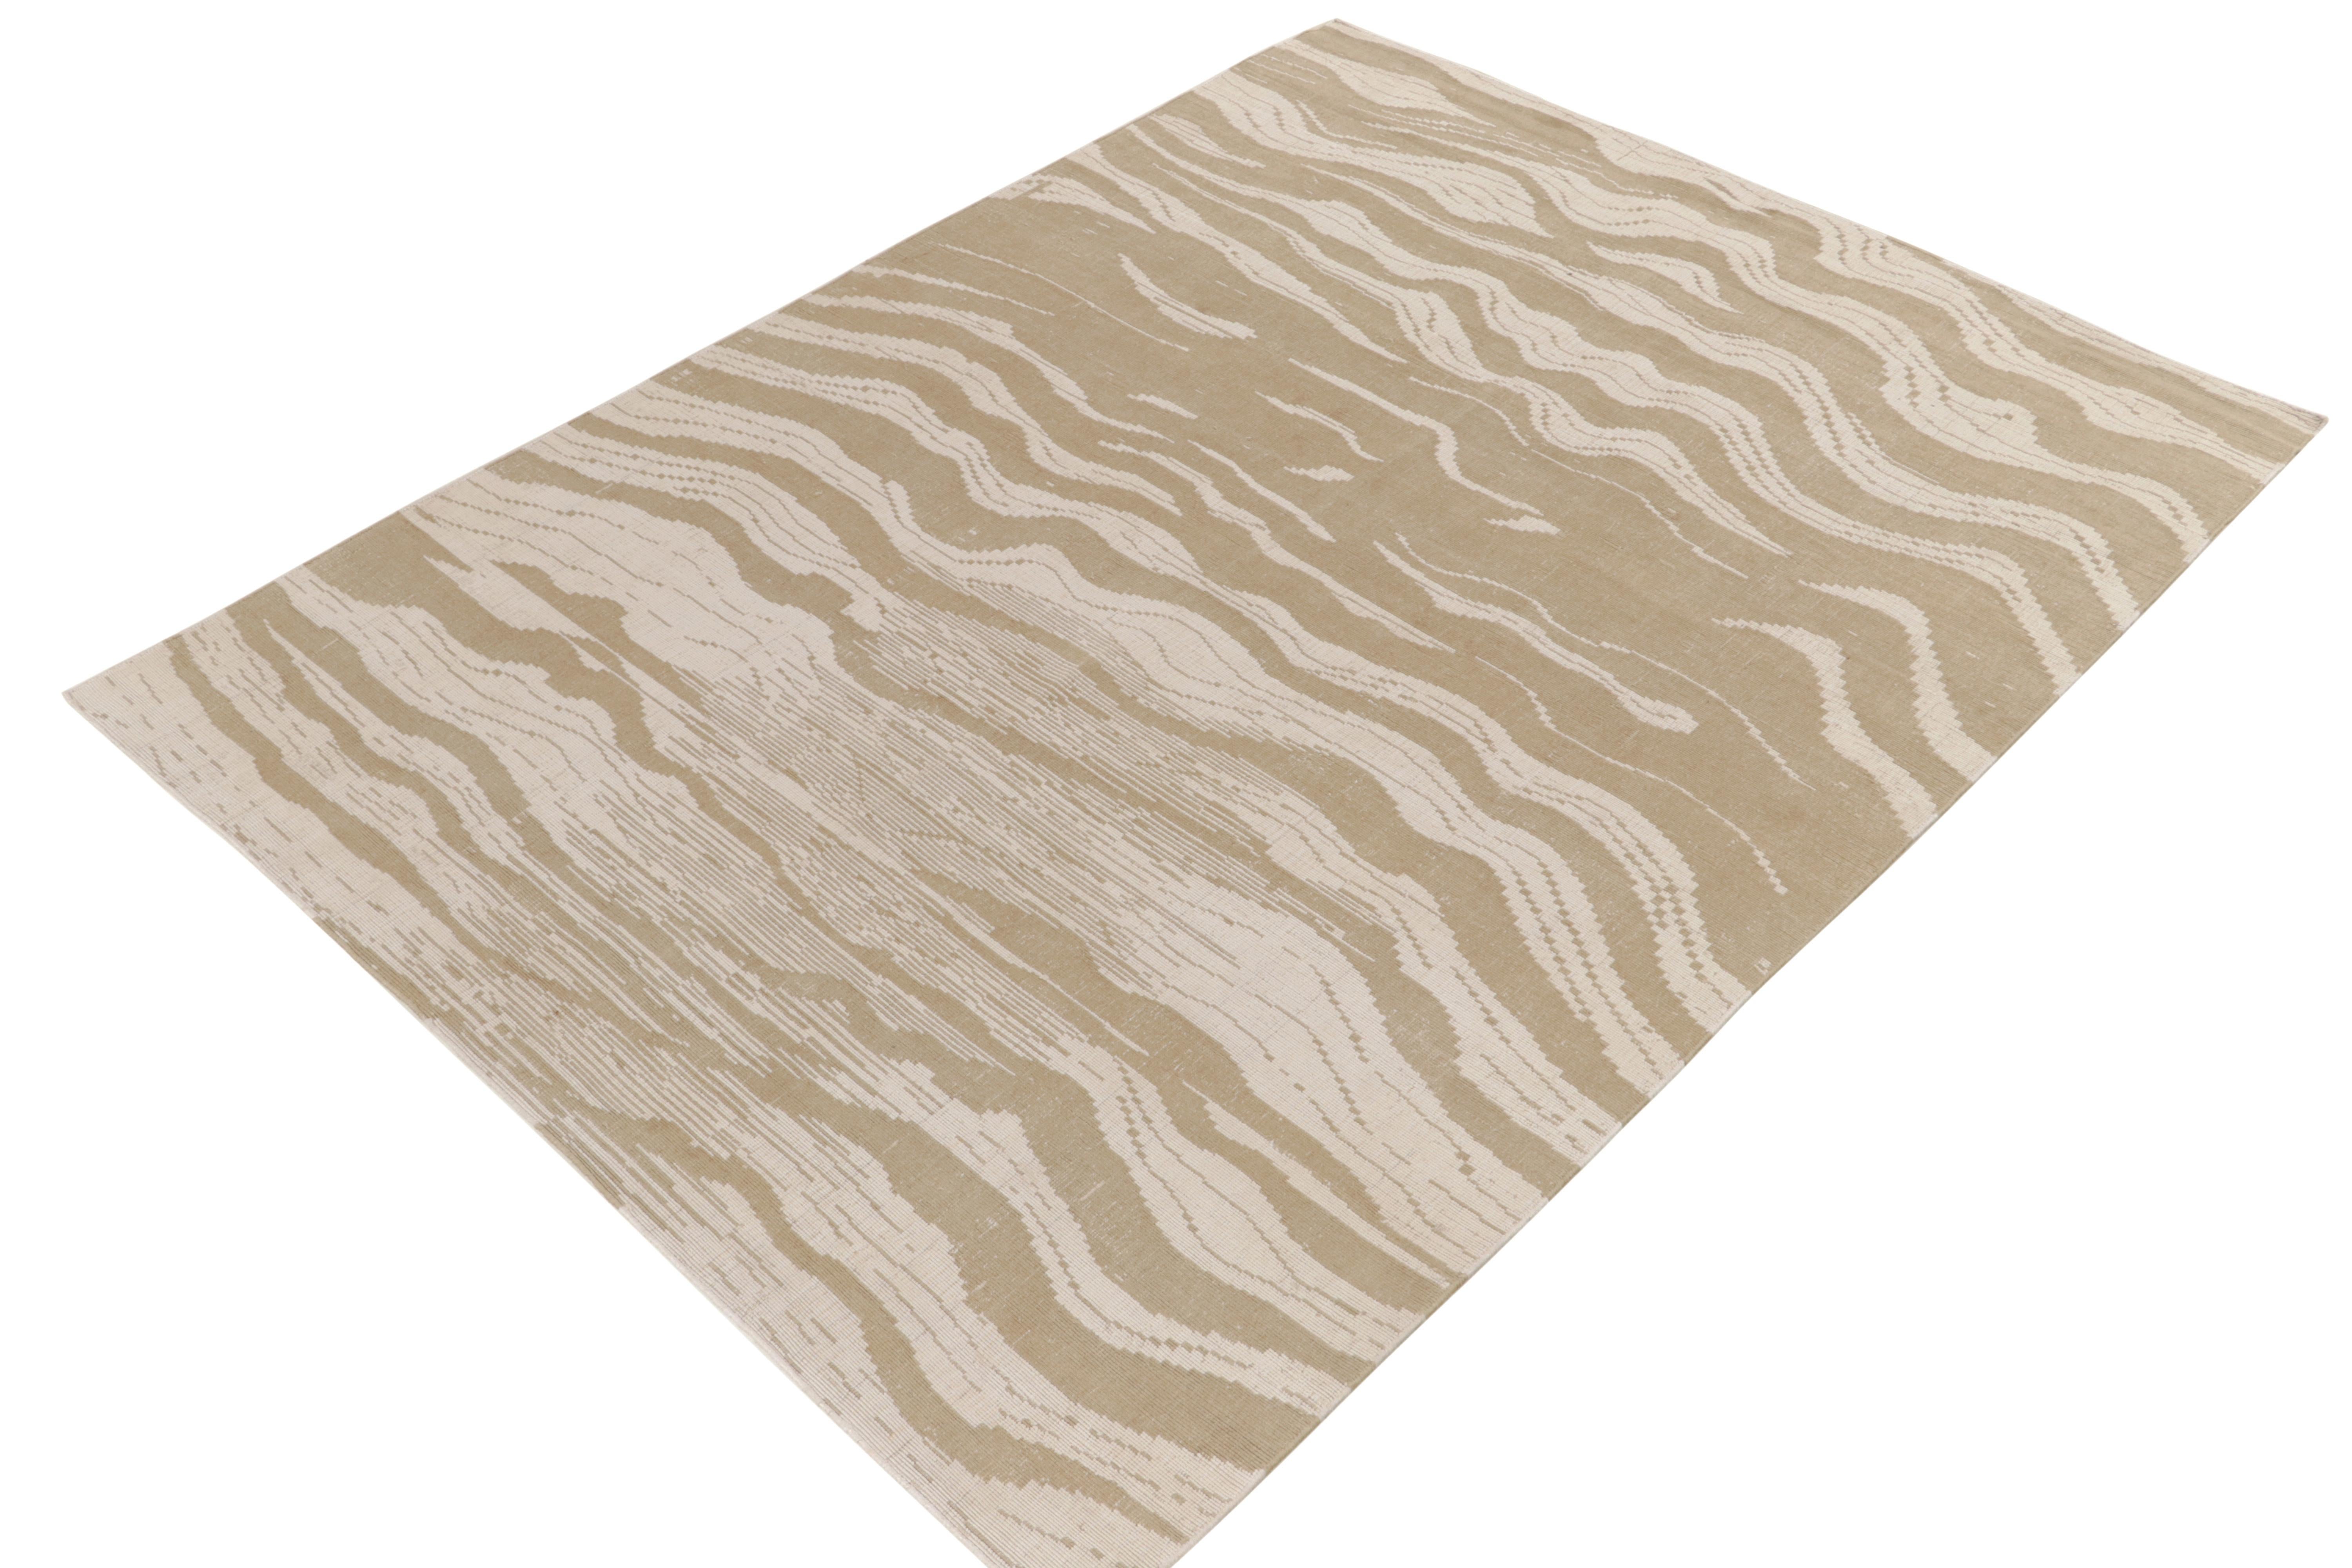 From Rug & Kilim’s contemporary collection, a bold take on abstract area rugs in hand-knotted wool and forgiving colorway. Soothing neutral beige-brown and white hues play in a wavy series of stripes—complemented by a subtle textural element seldom